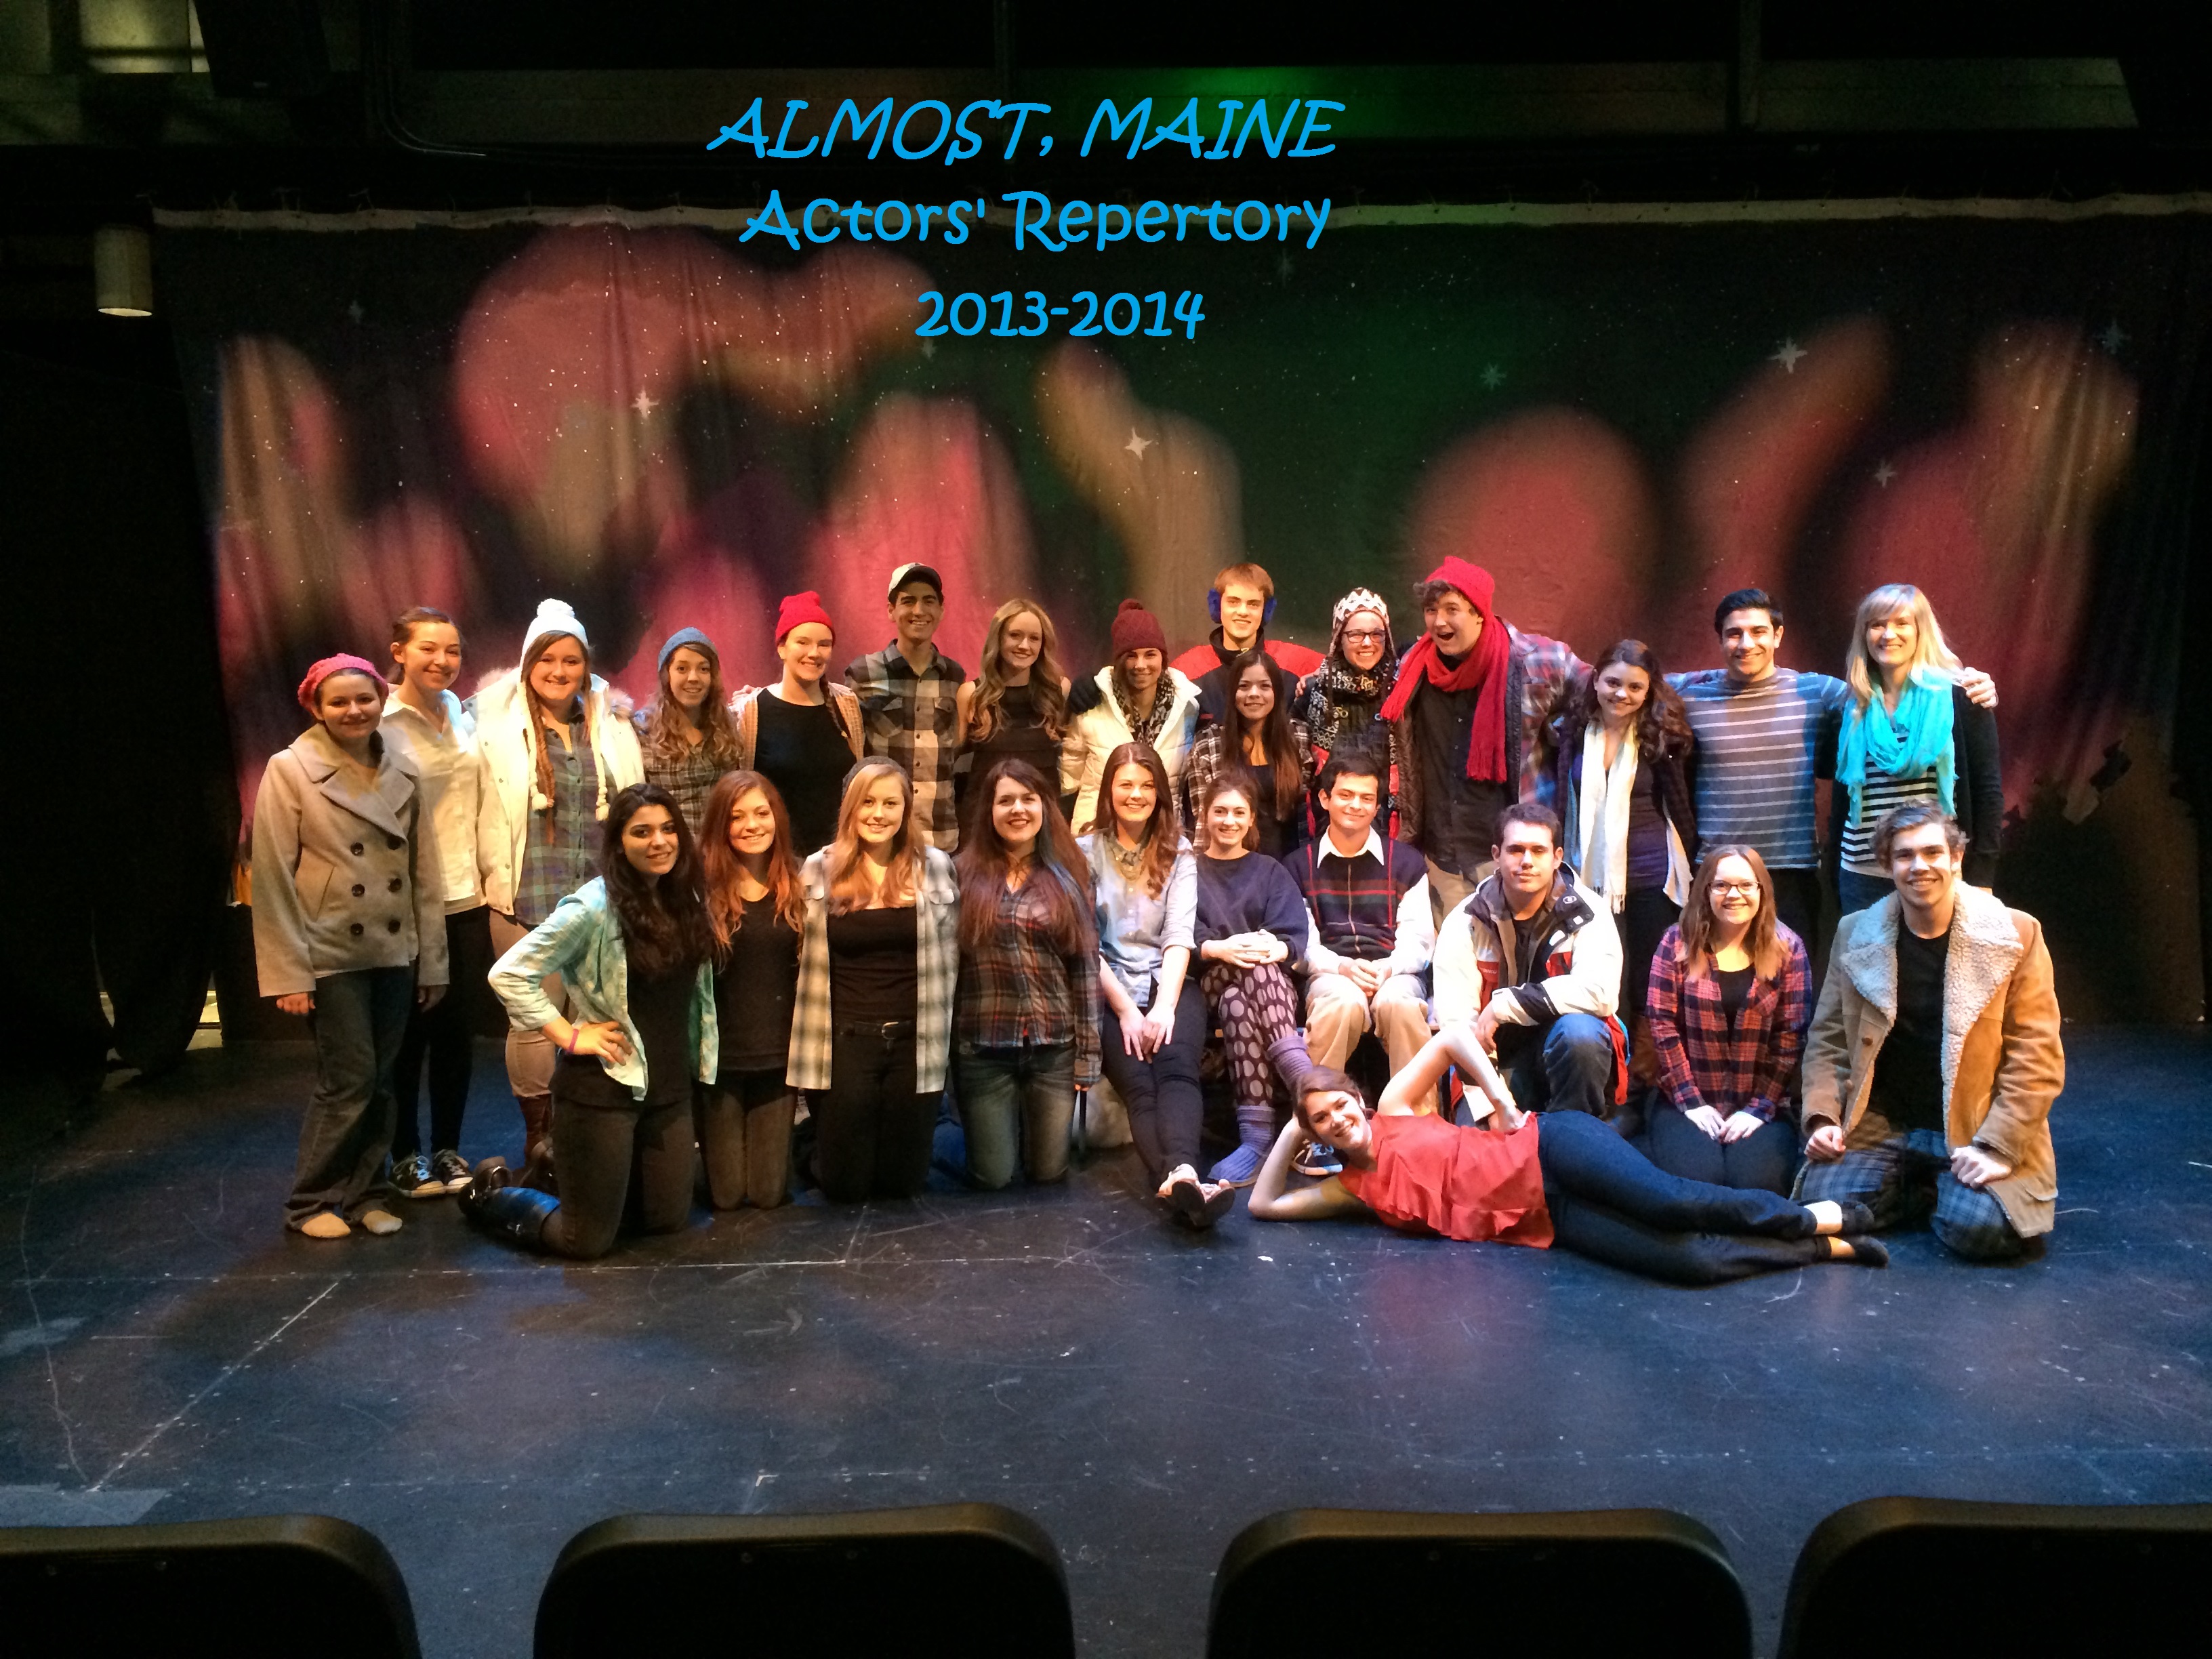 Almost, Maine by Jon Cariani, Winter 2014